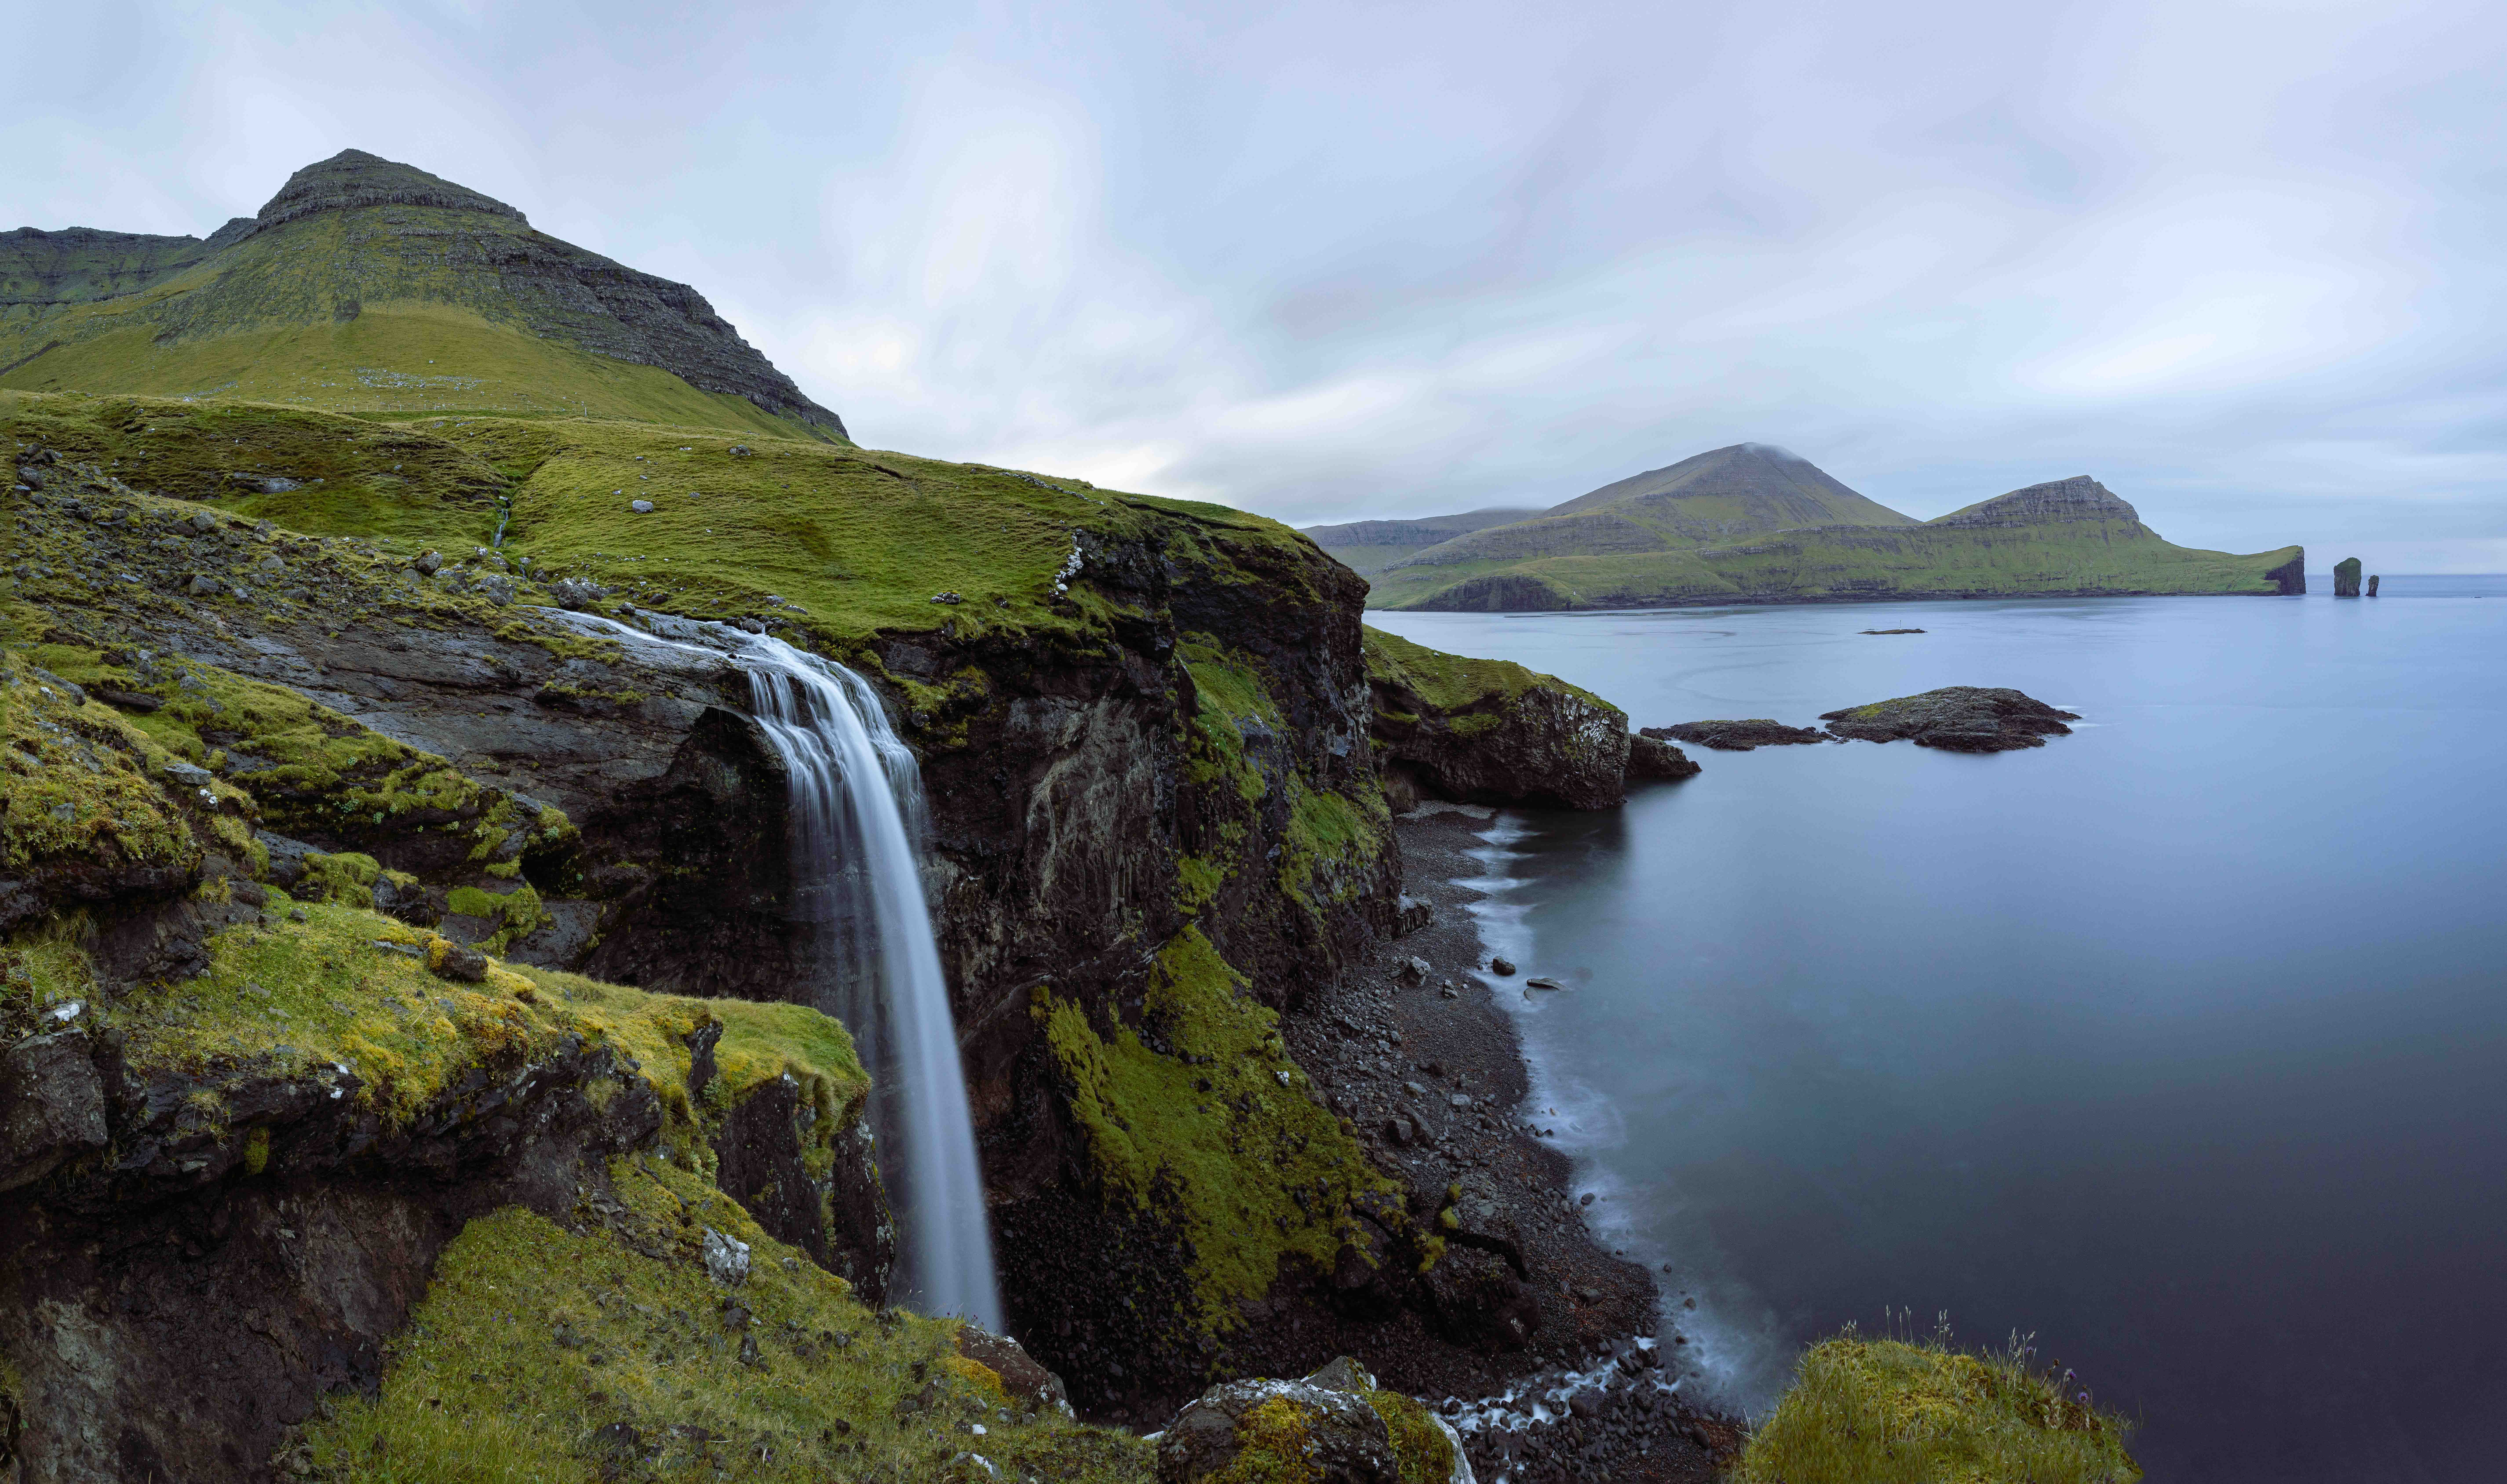 This is an image of a hiking trail on the faroe islands. There is a waterfall, grassy green hills and views of the ocean.